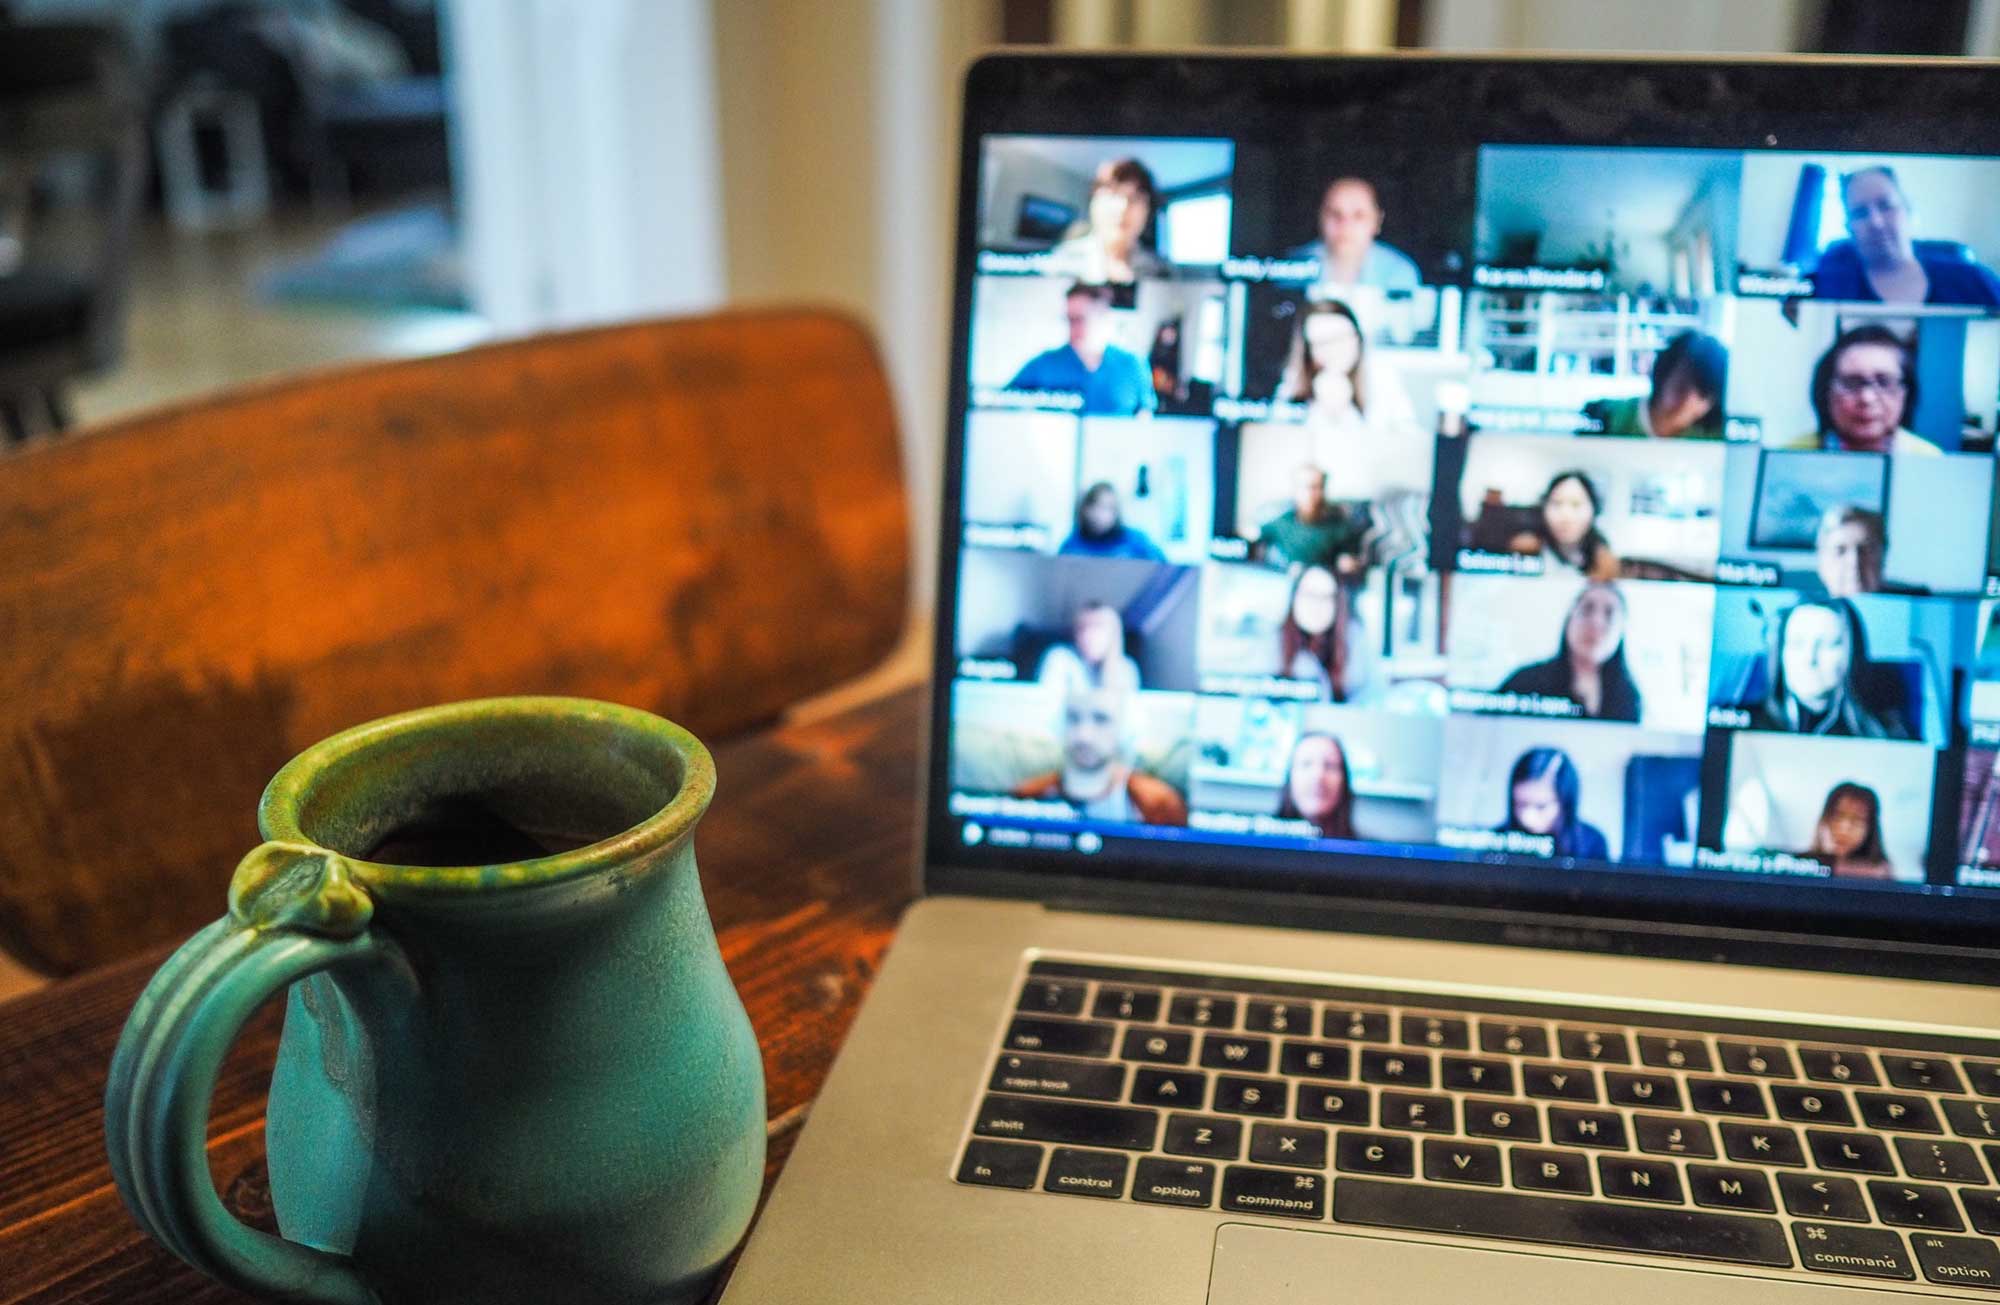 Laptop with cup of tea and other callers on screen